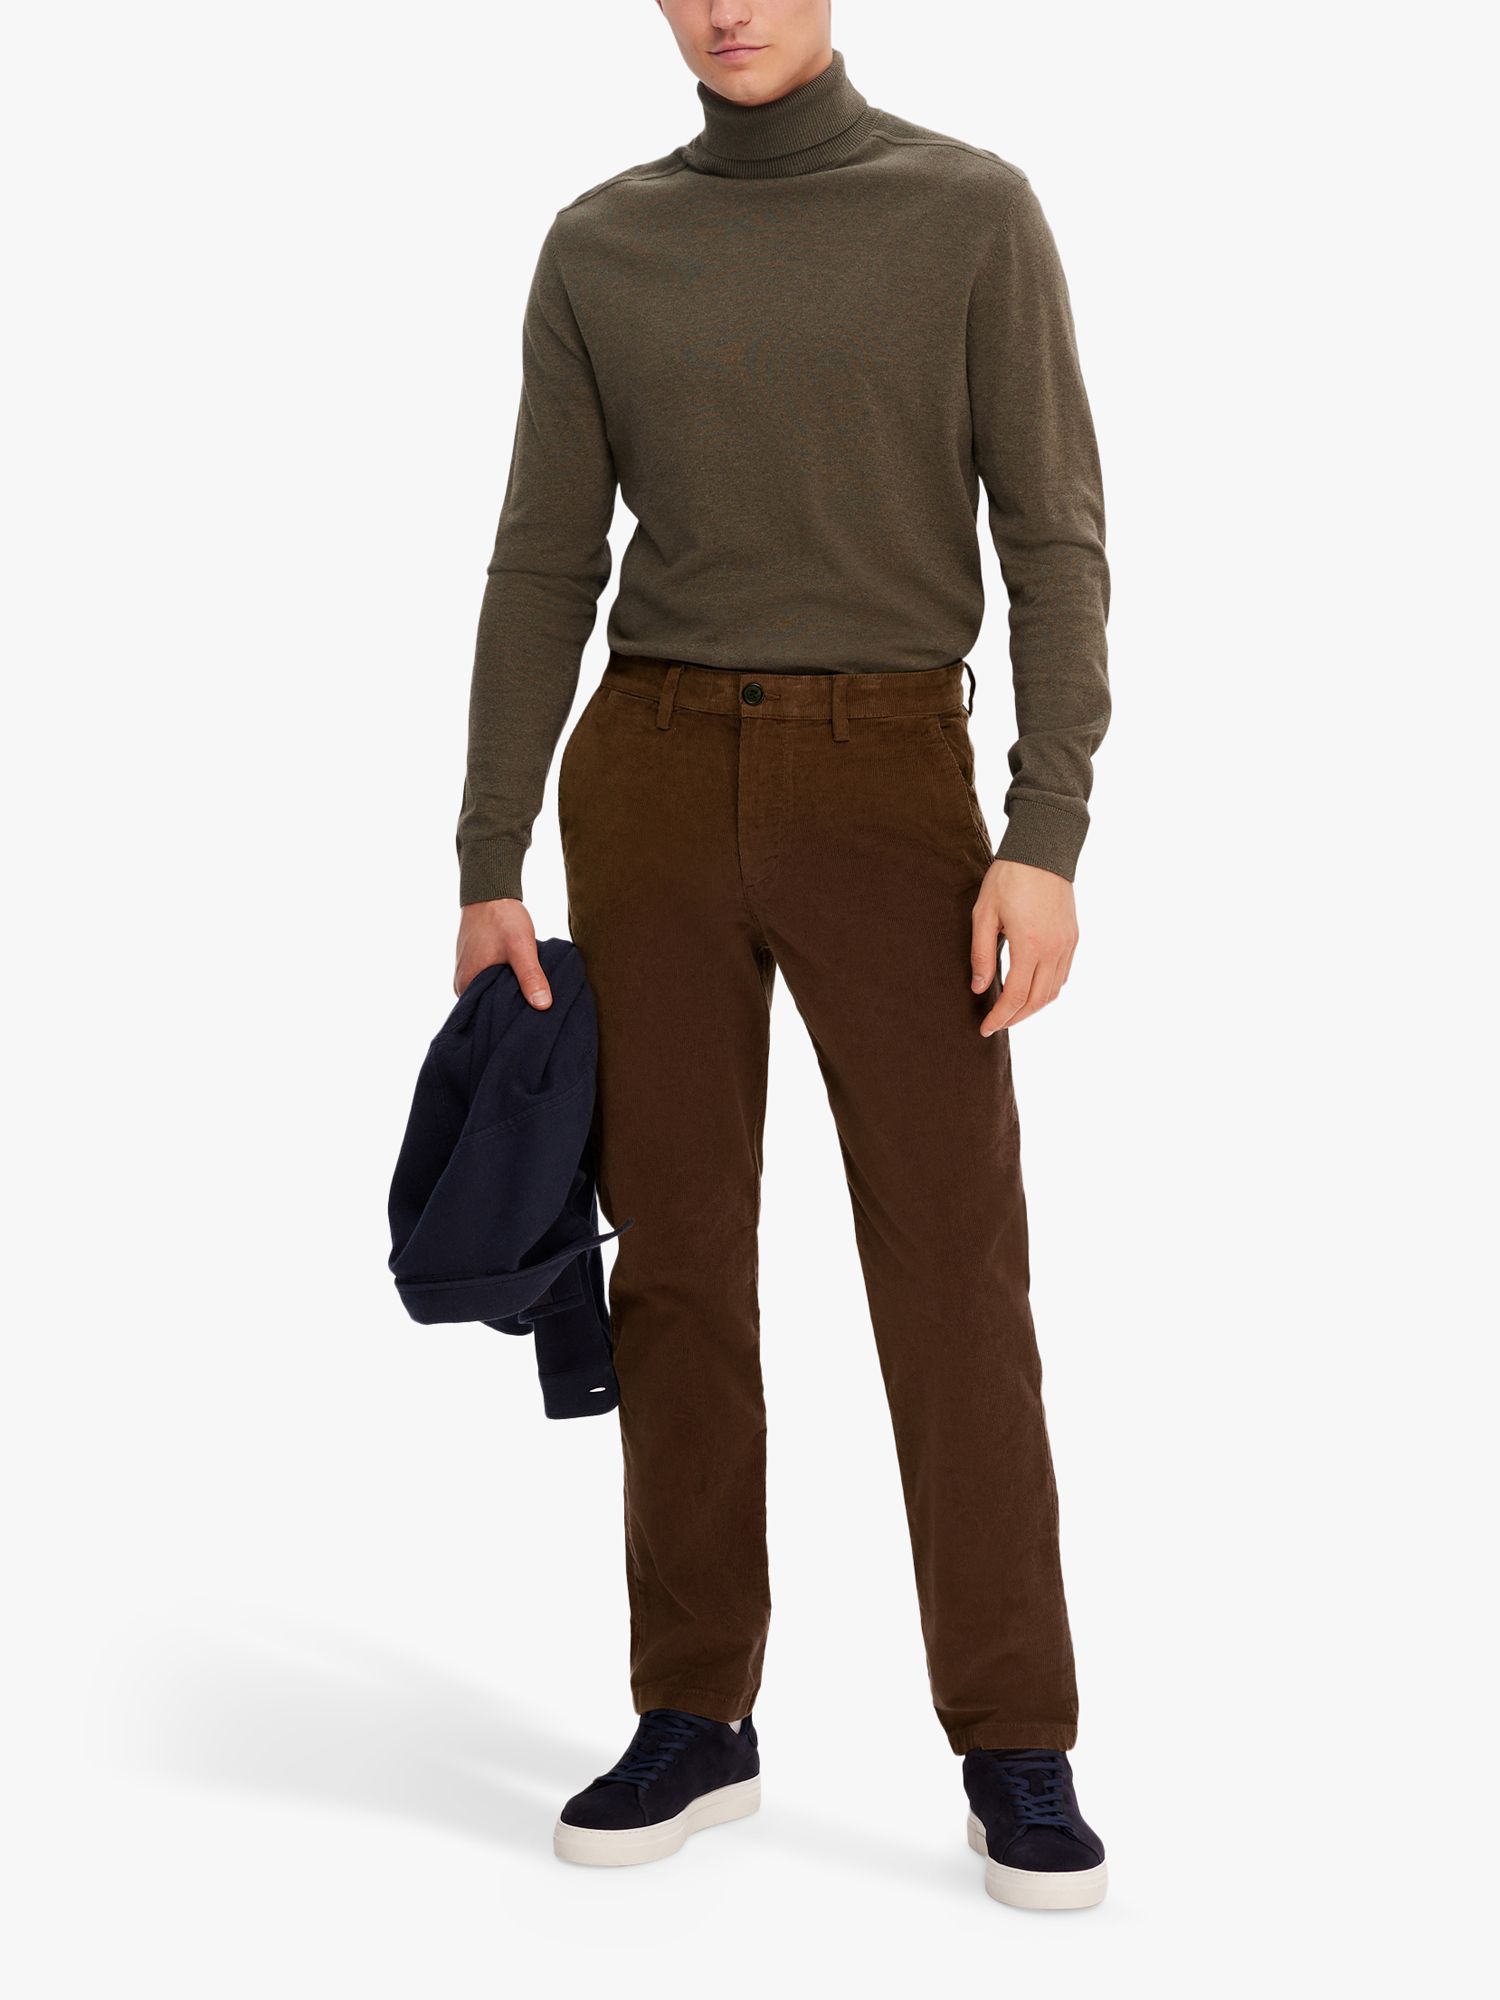 SELECTED HOMME Classic Chino Trousers, Dark Earth, 34R